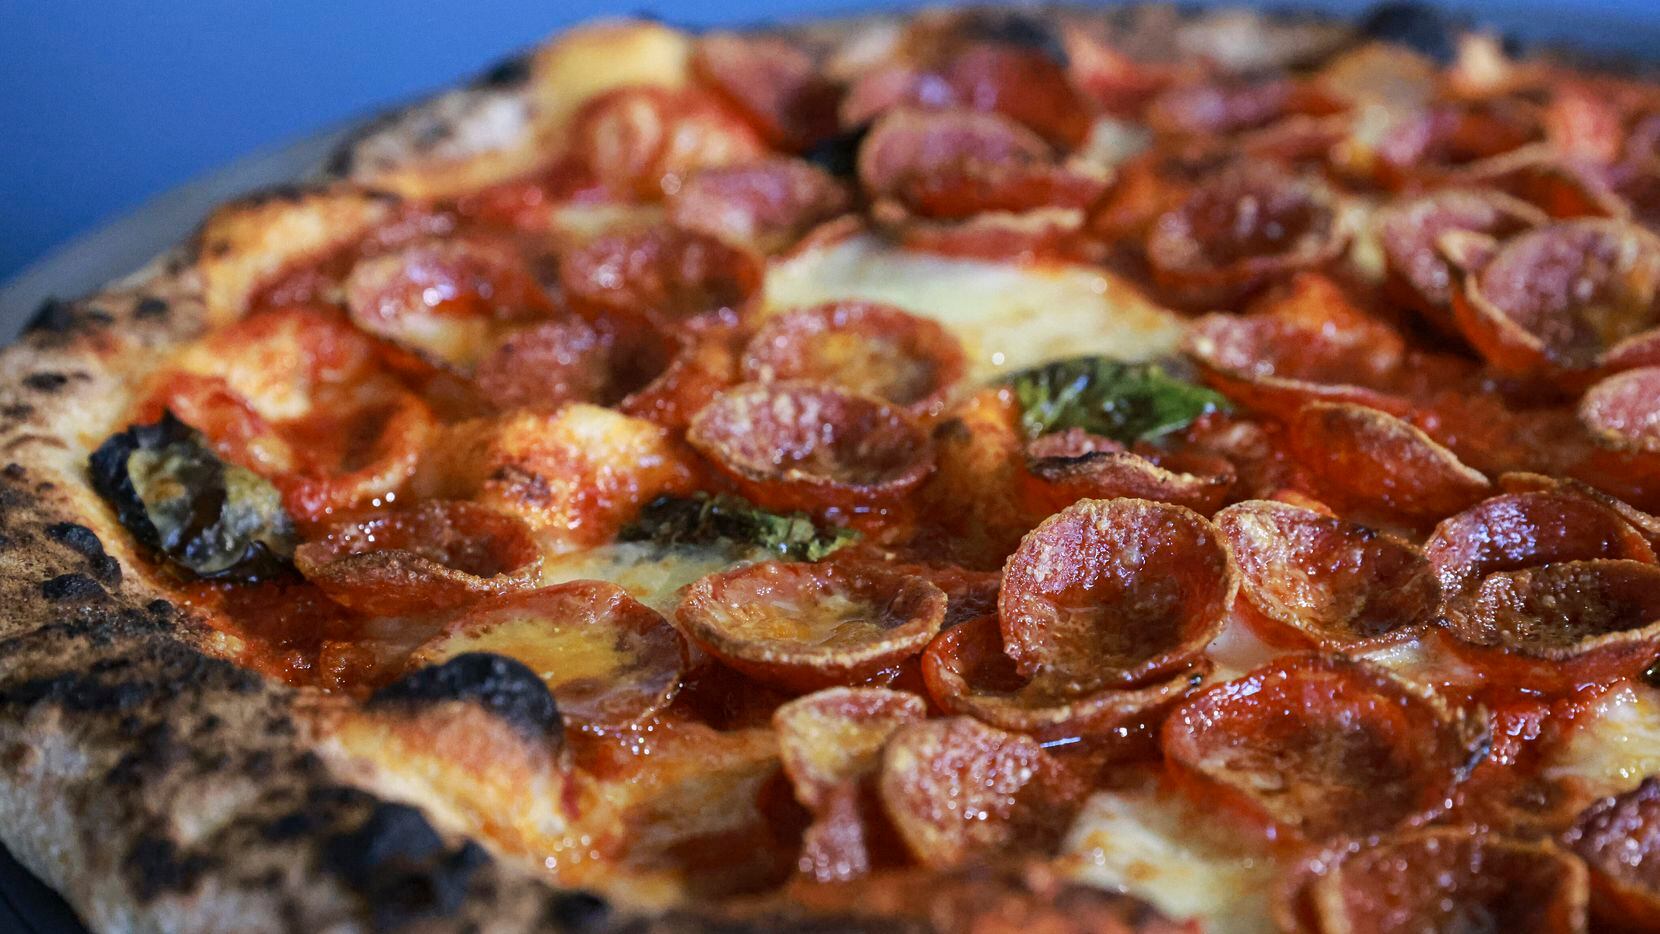 Pizzana started in California, but on Nov. 15, 2022, the first one opens in Texas on Dallas'...